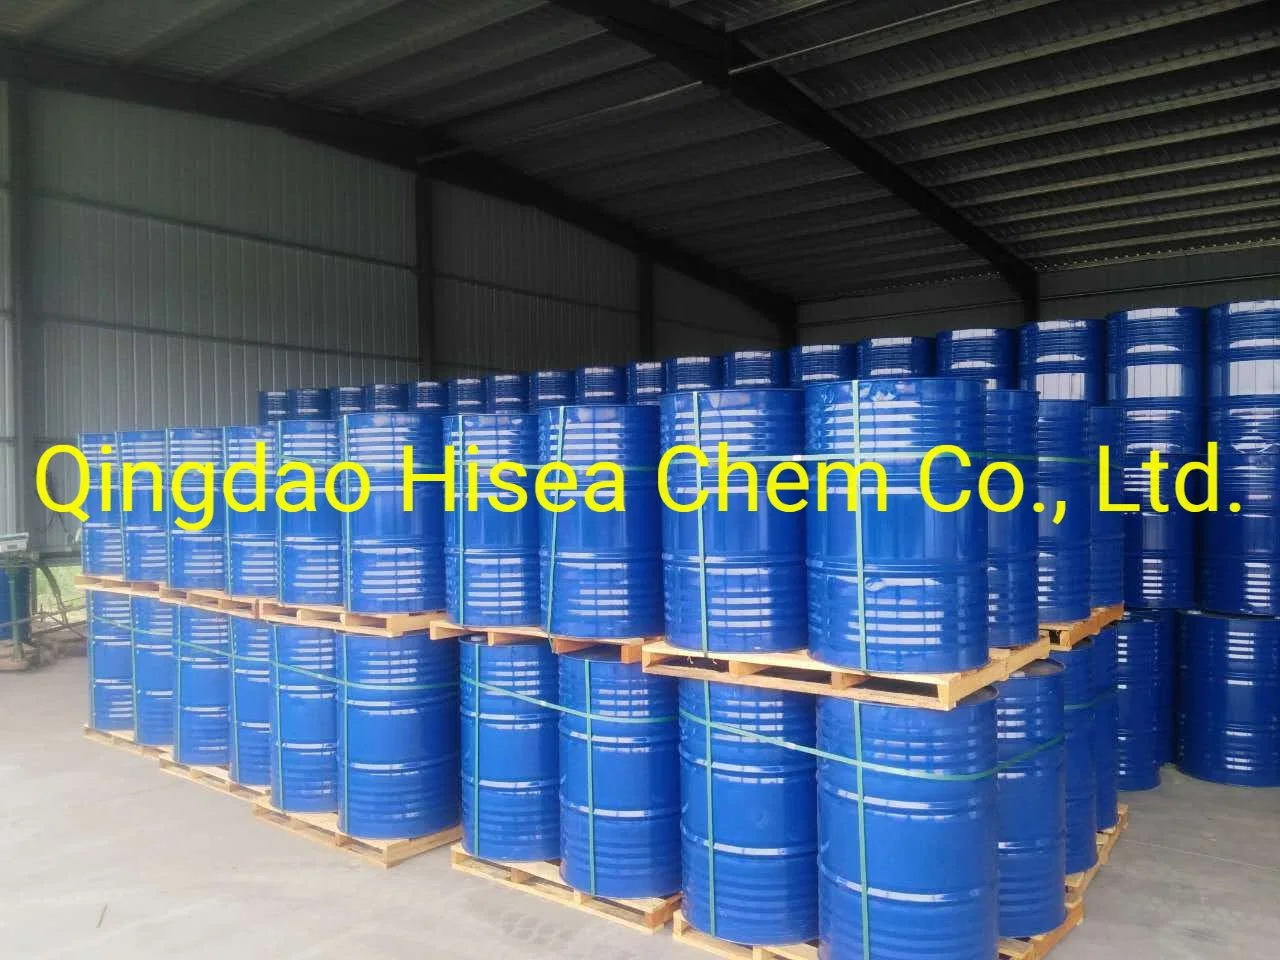 High Quality of Ethyl Acetate (EAC) 99%Min